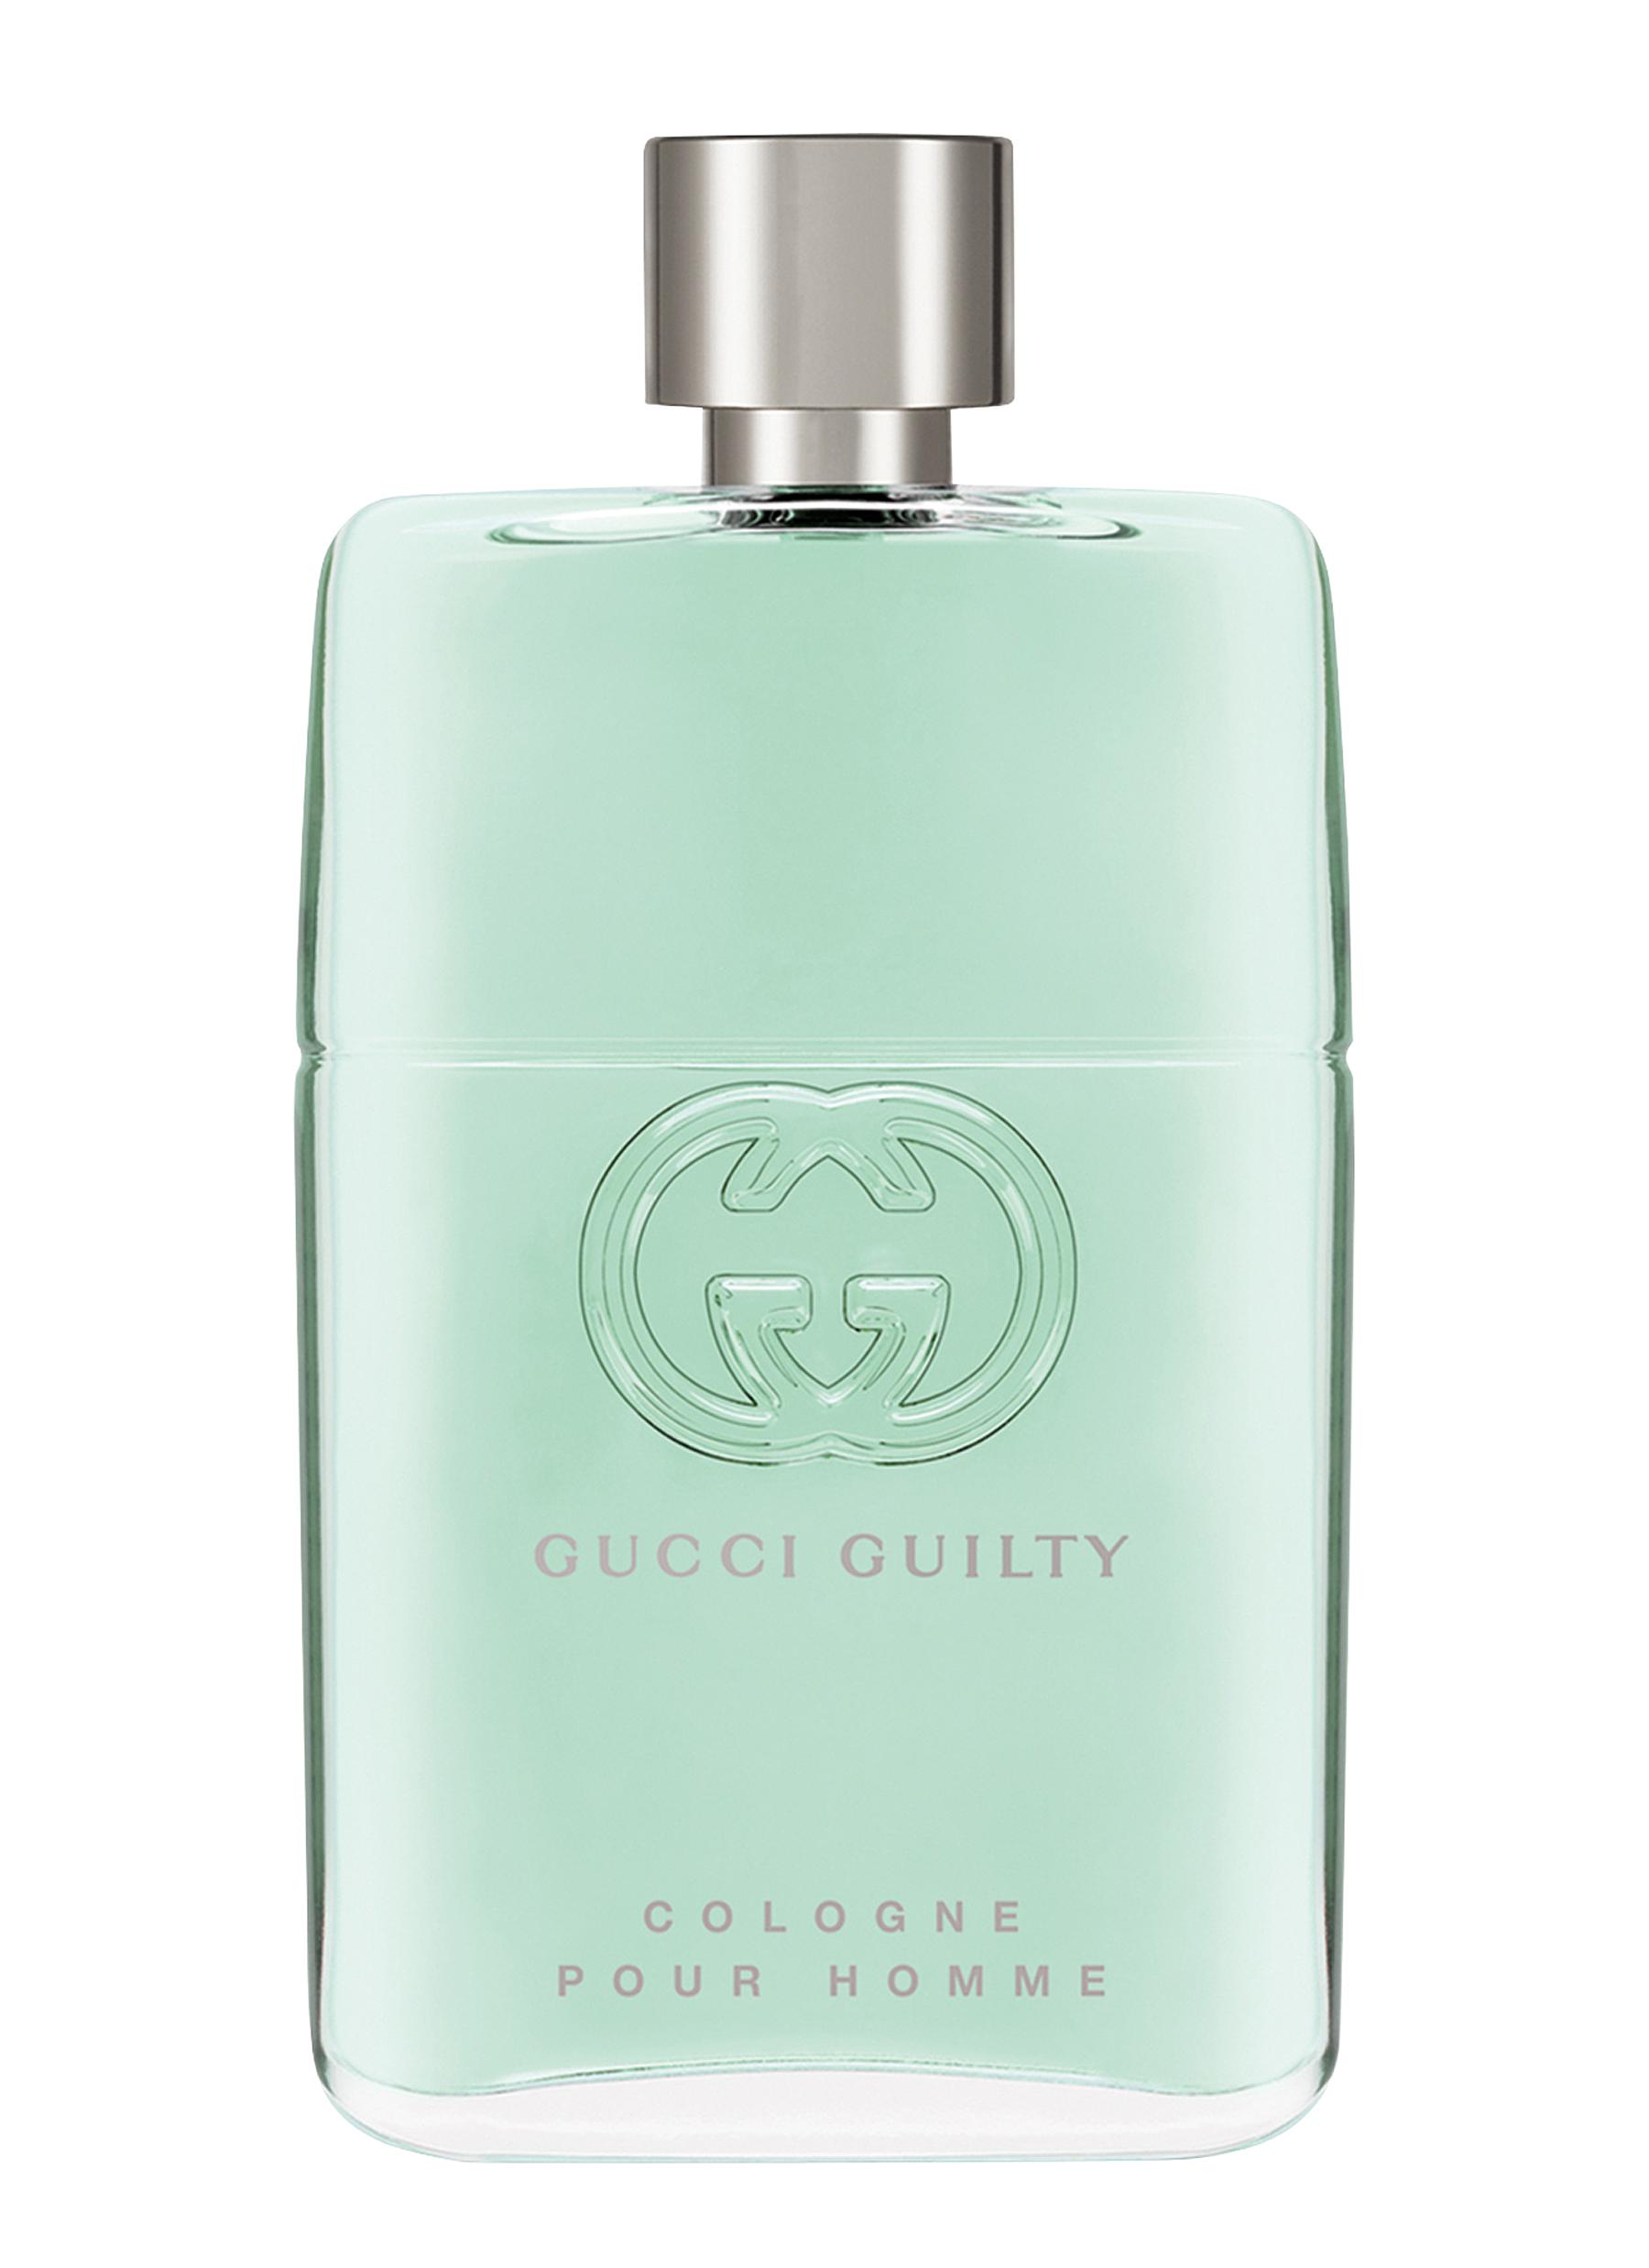 gucci guilty perfume notes